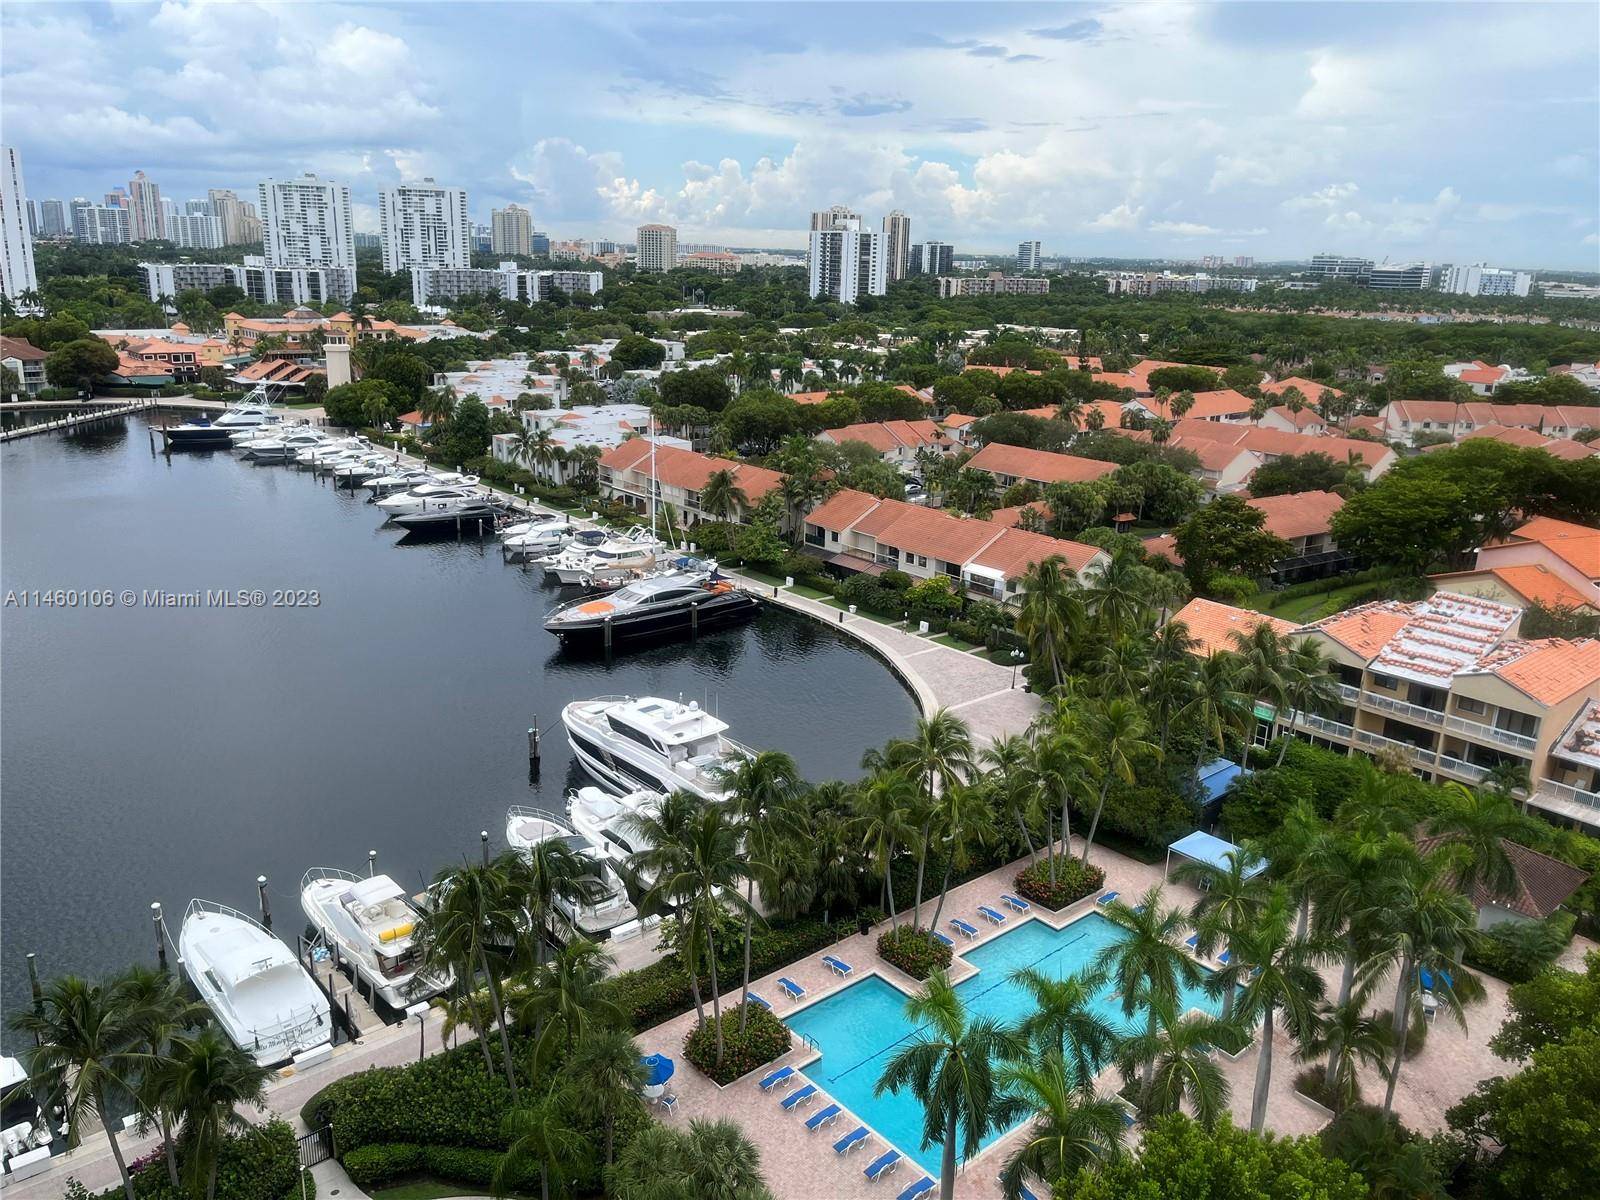 BEST DEAL IN AVENTURA ! Rarely found 2 bedroom 2 bath PENTHOUSE DREAM in beautiful Portsview at the Waterways, located in the best section of Aventura !